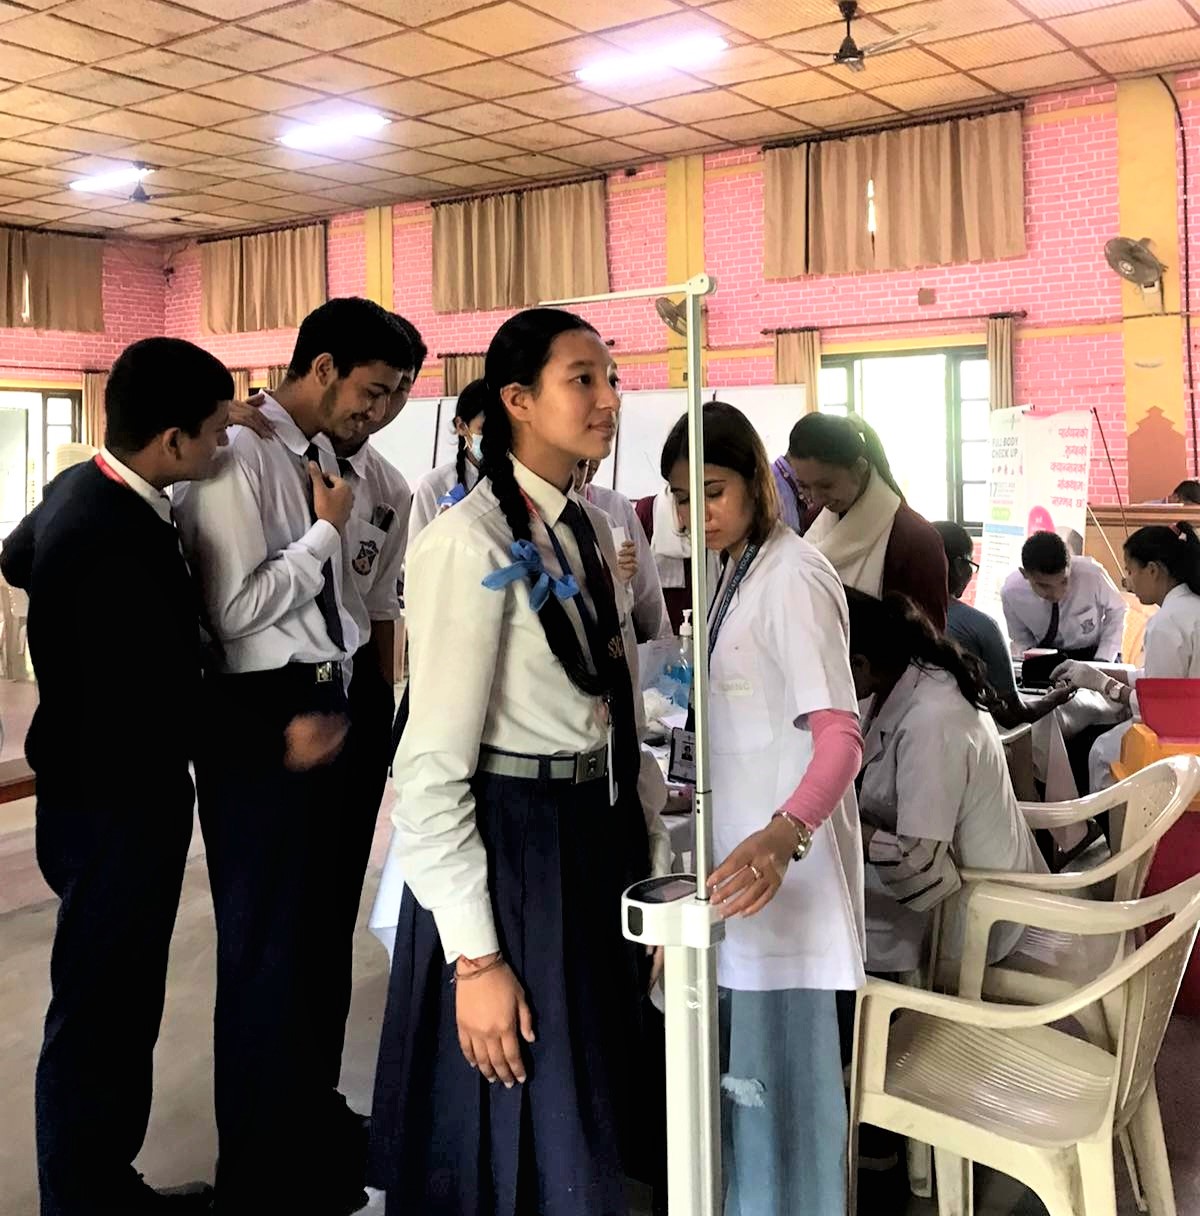 Successful Free Health Camp at St. Xavier’s School Benefits Hundreds of Students and Teachers